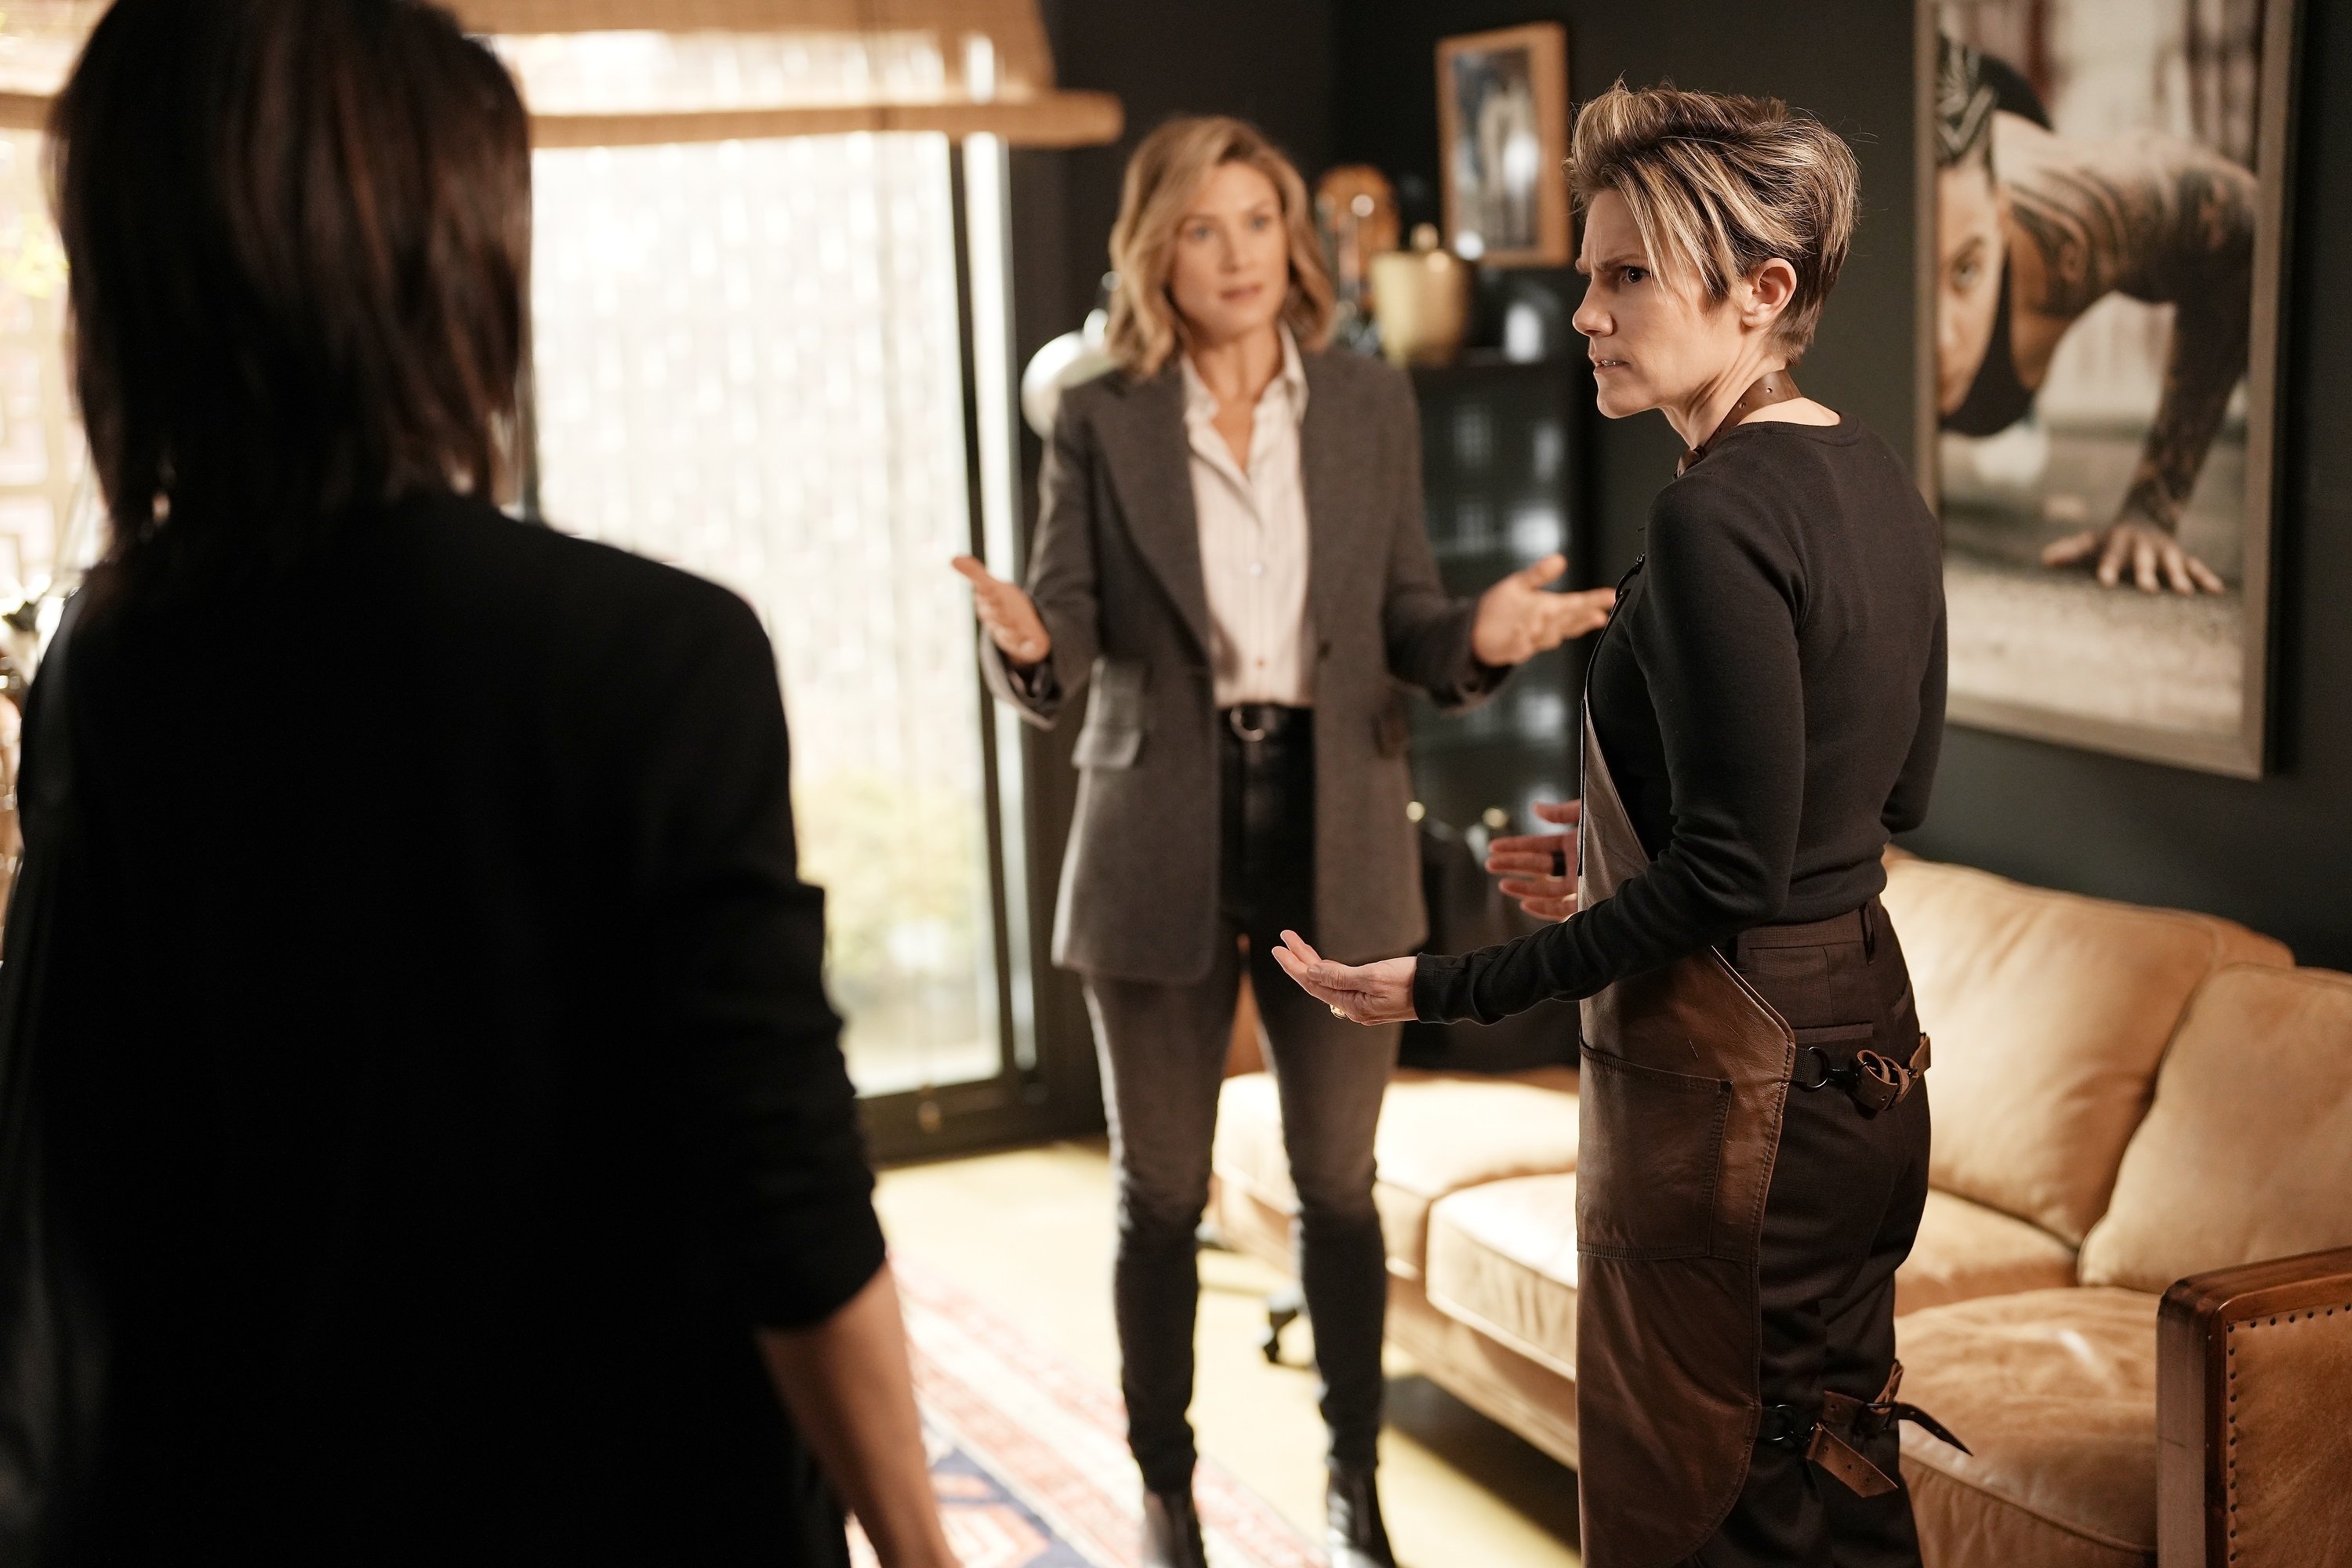 'A Million Little Things' Jessica Lindsey as Greta's wife, and Cameron Esposito as Greta arguing